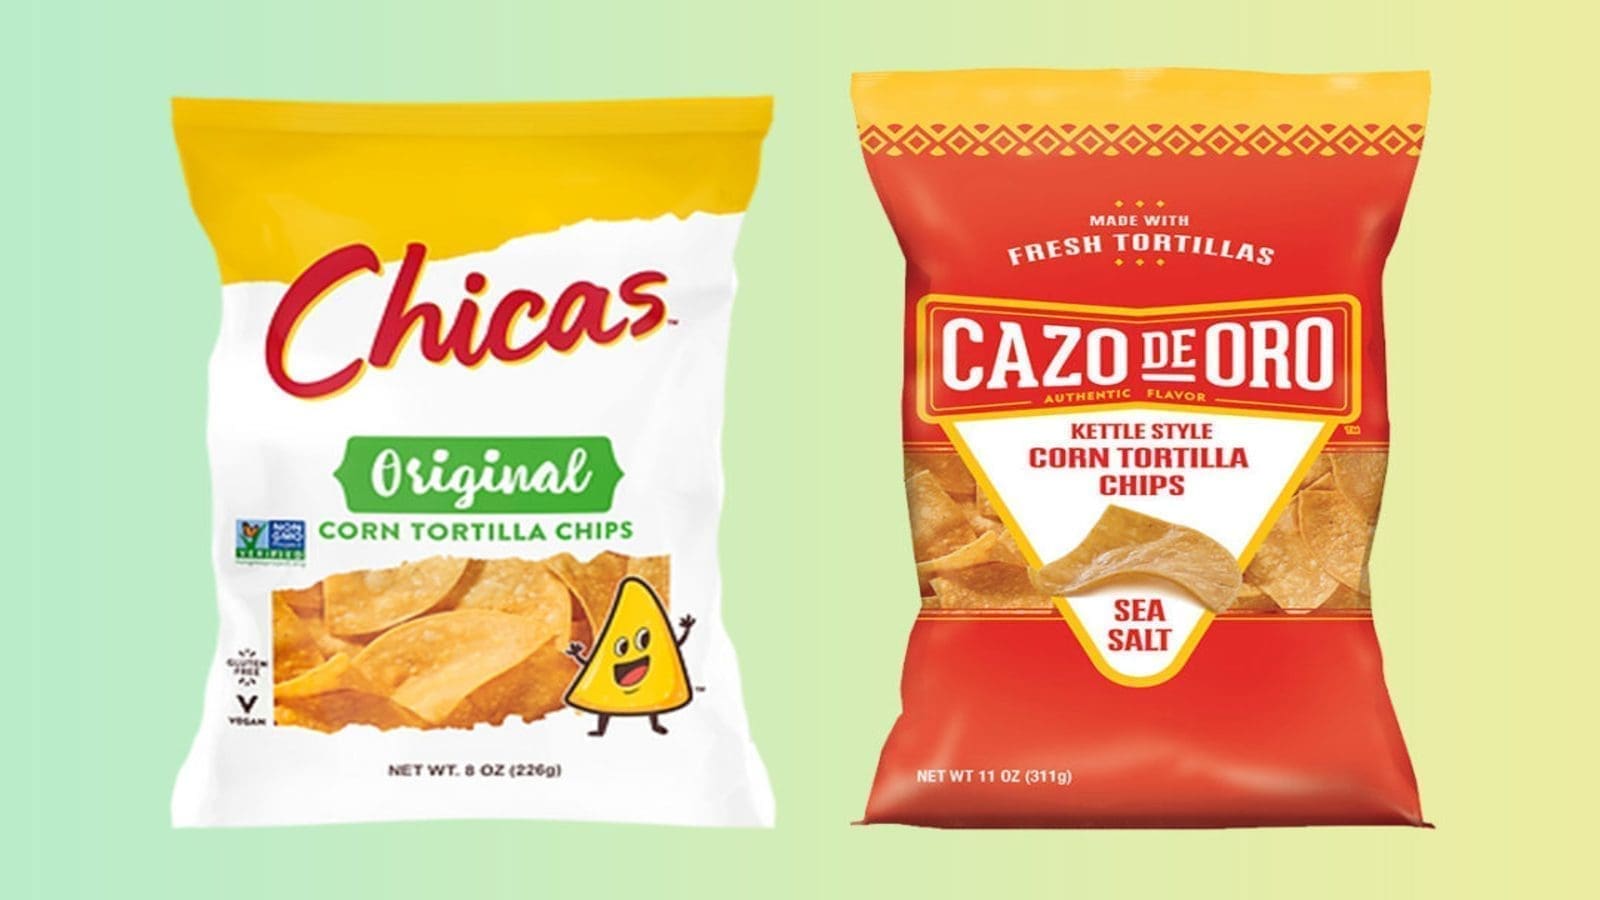 Benestar to invest US$2.5 m on new tortilla chip facility